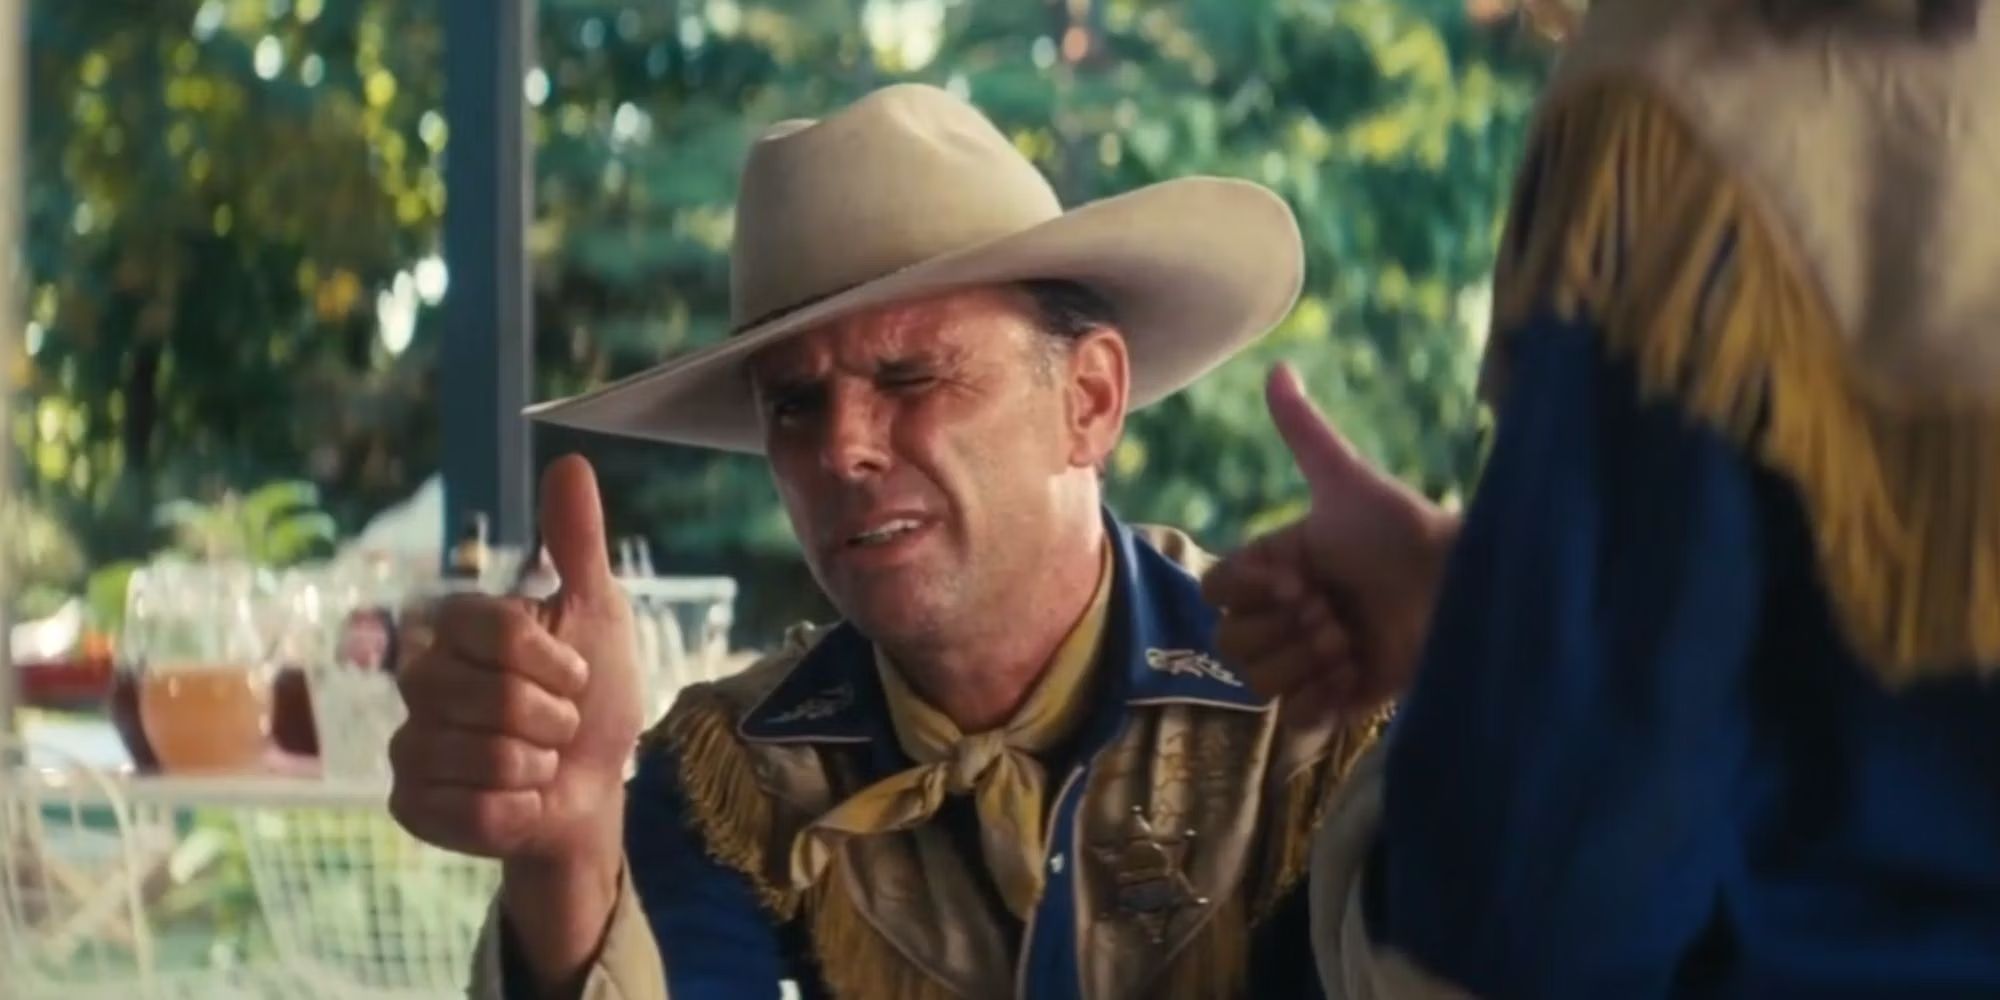 Walton Goggins giving the thumbs up while wearing a yellow and blue cowboy outfit